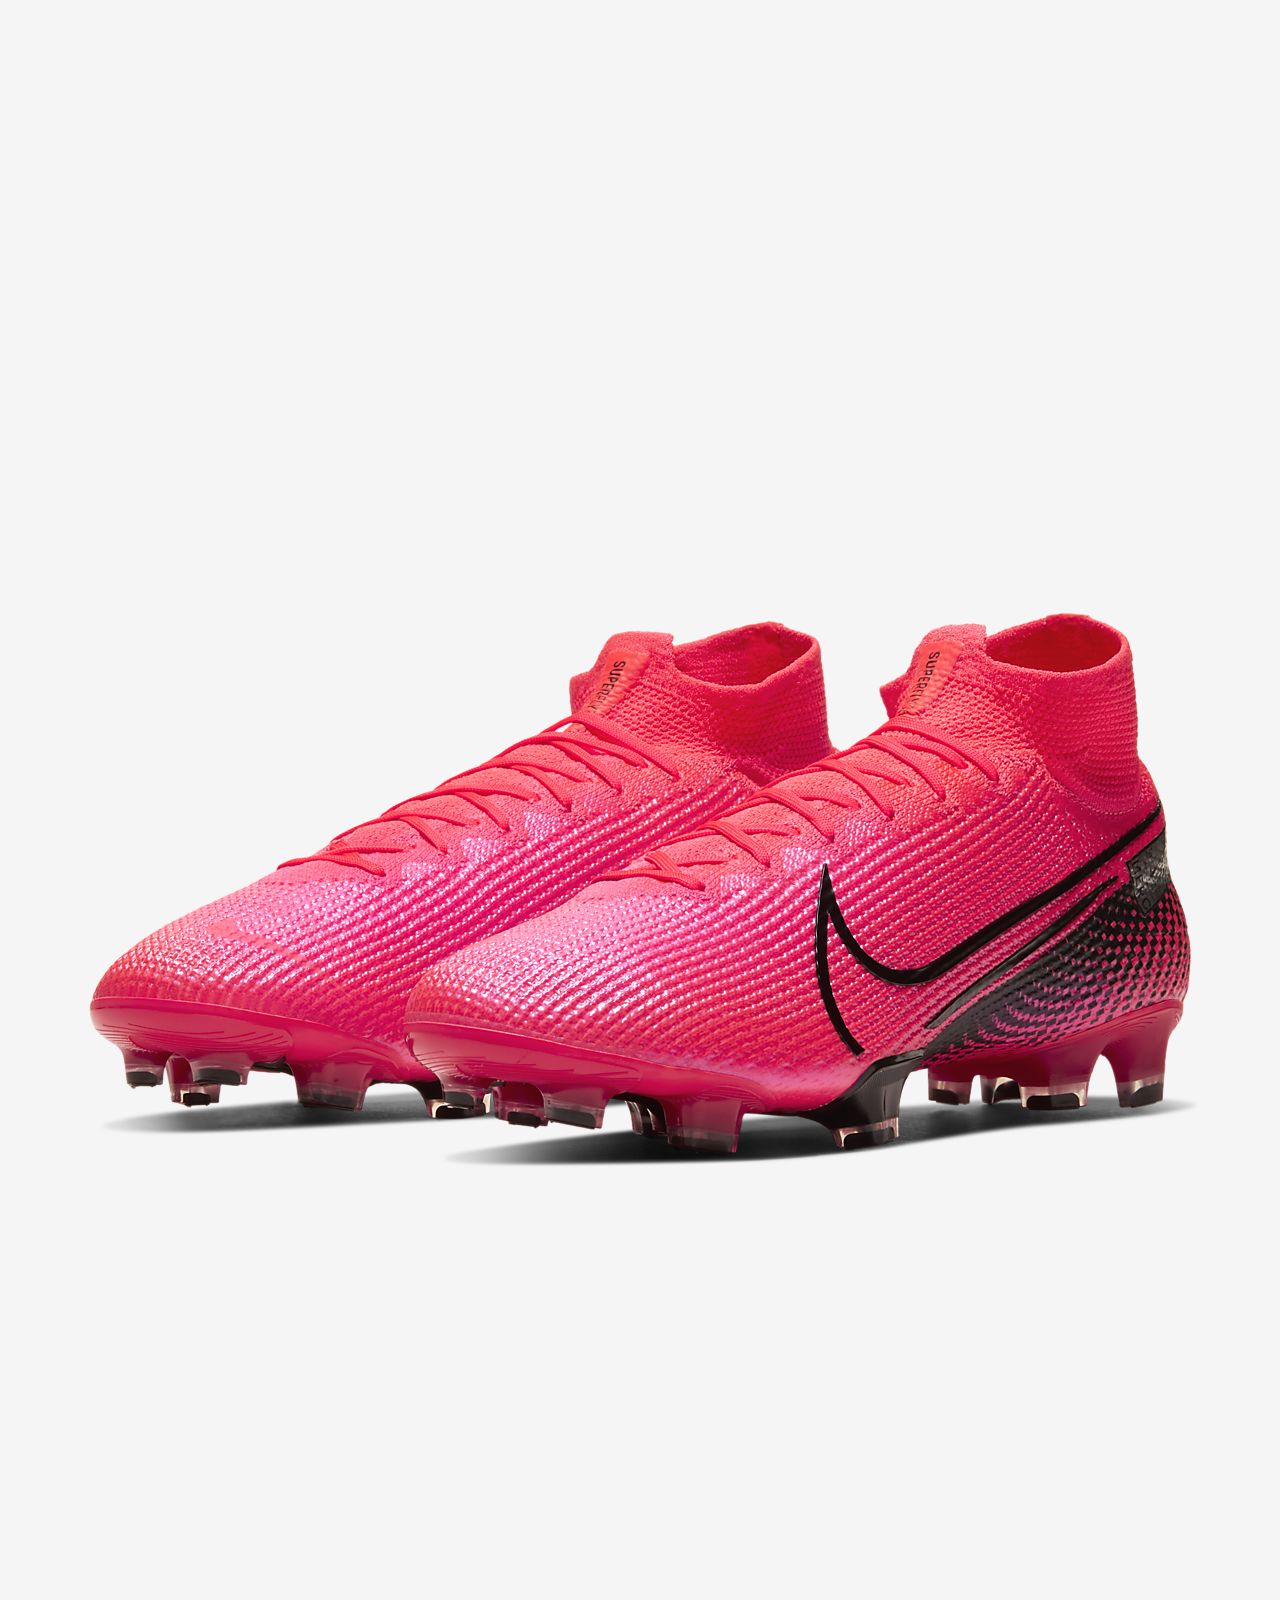 Buy Nike Mercurial Superfly VI Elite Firm Ground Only £ 119.